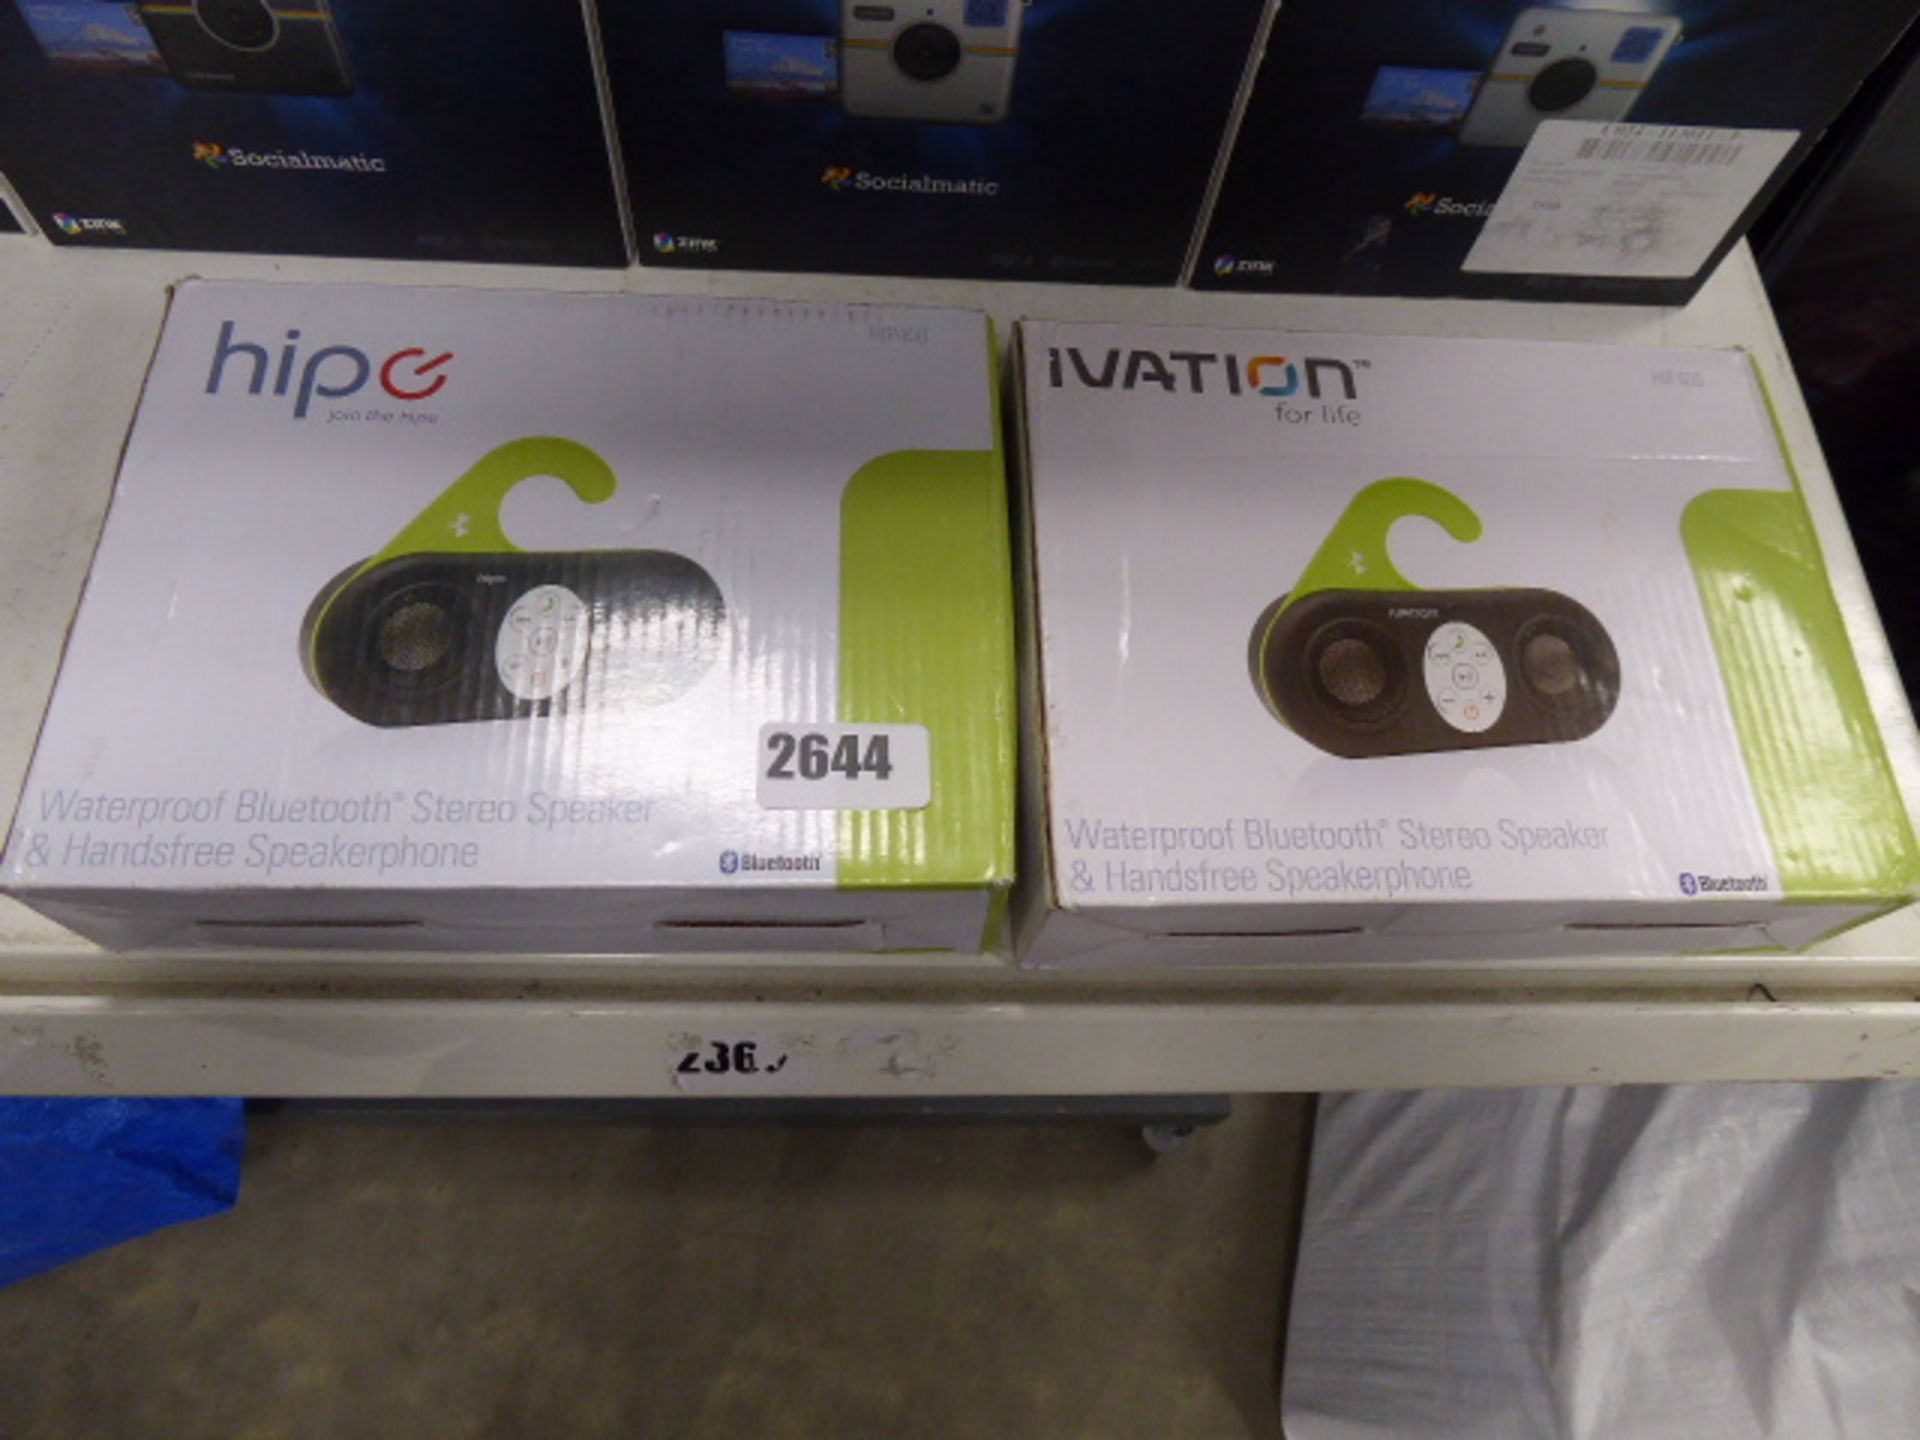 Hypo and Ivation shower speakers